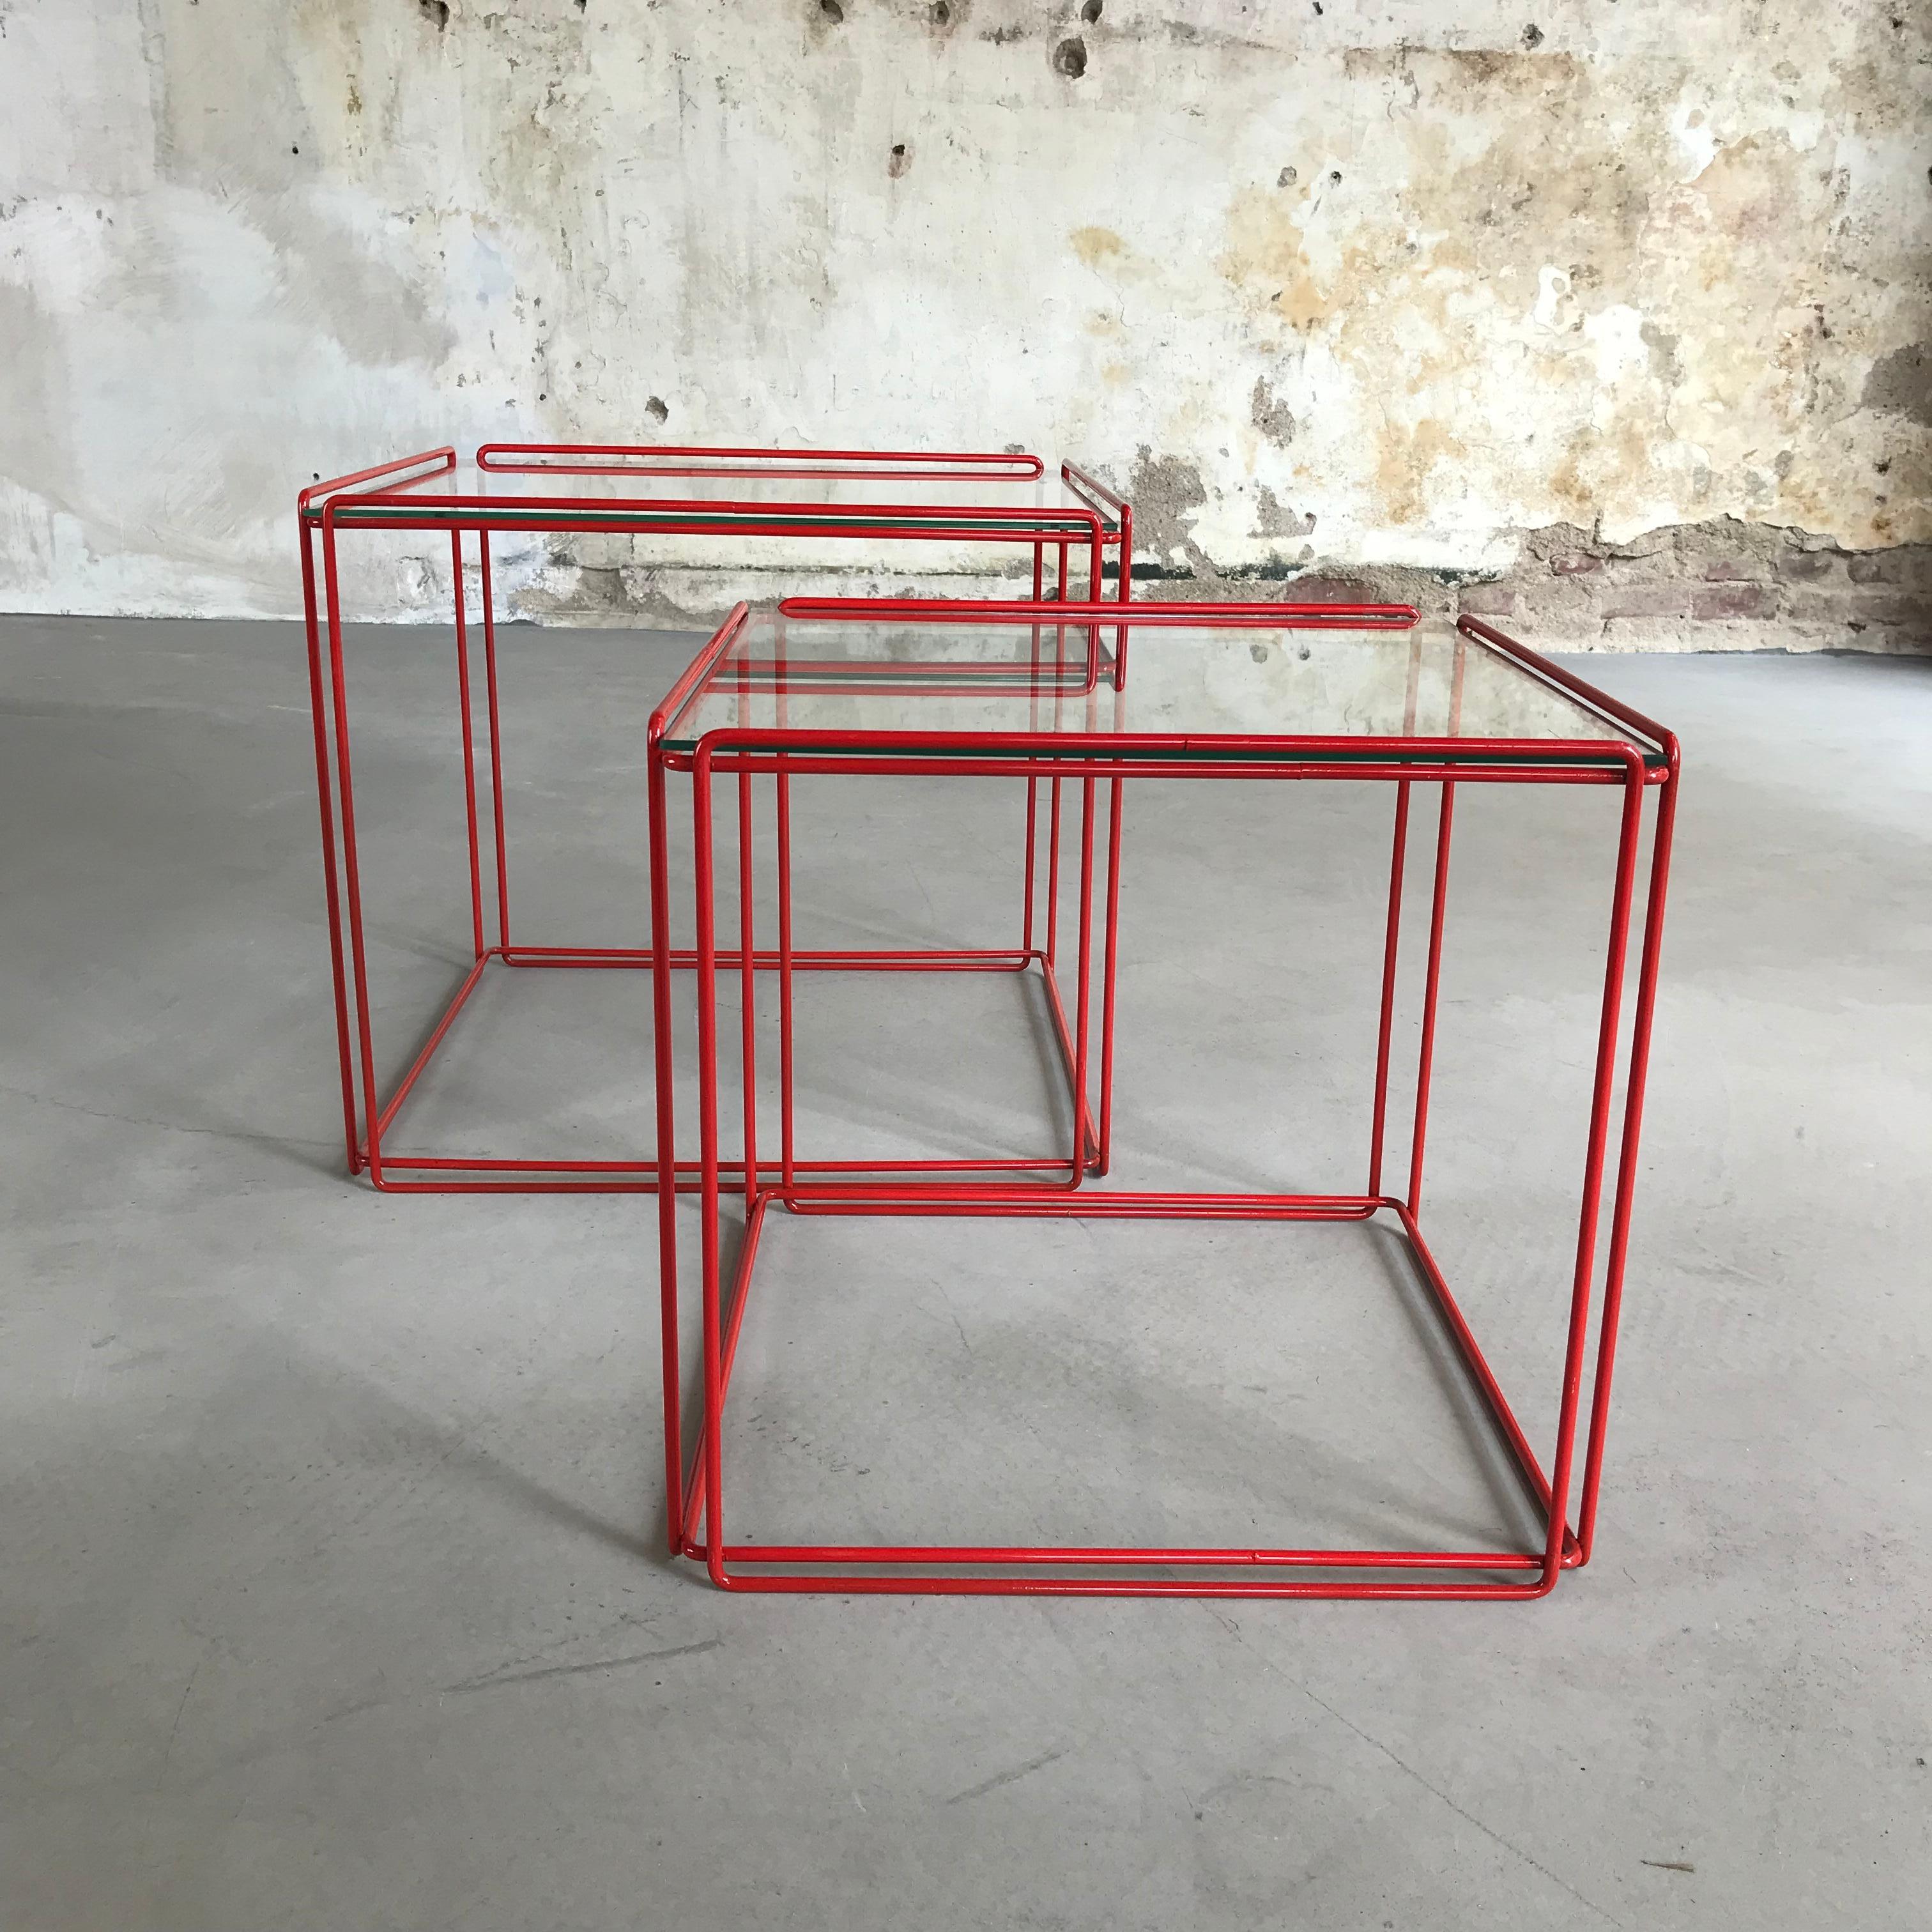 Beautiful, graphical and minimalist design by Max Sauze for Max Sauze Studio or Atrow, circa 1970. These tables features a red colored metal base and a glass 'shelve'. The glass and metal wire structure gives this table a very transparent, minimal